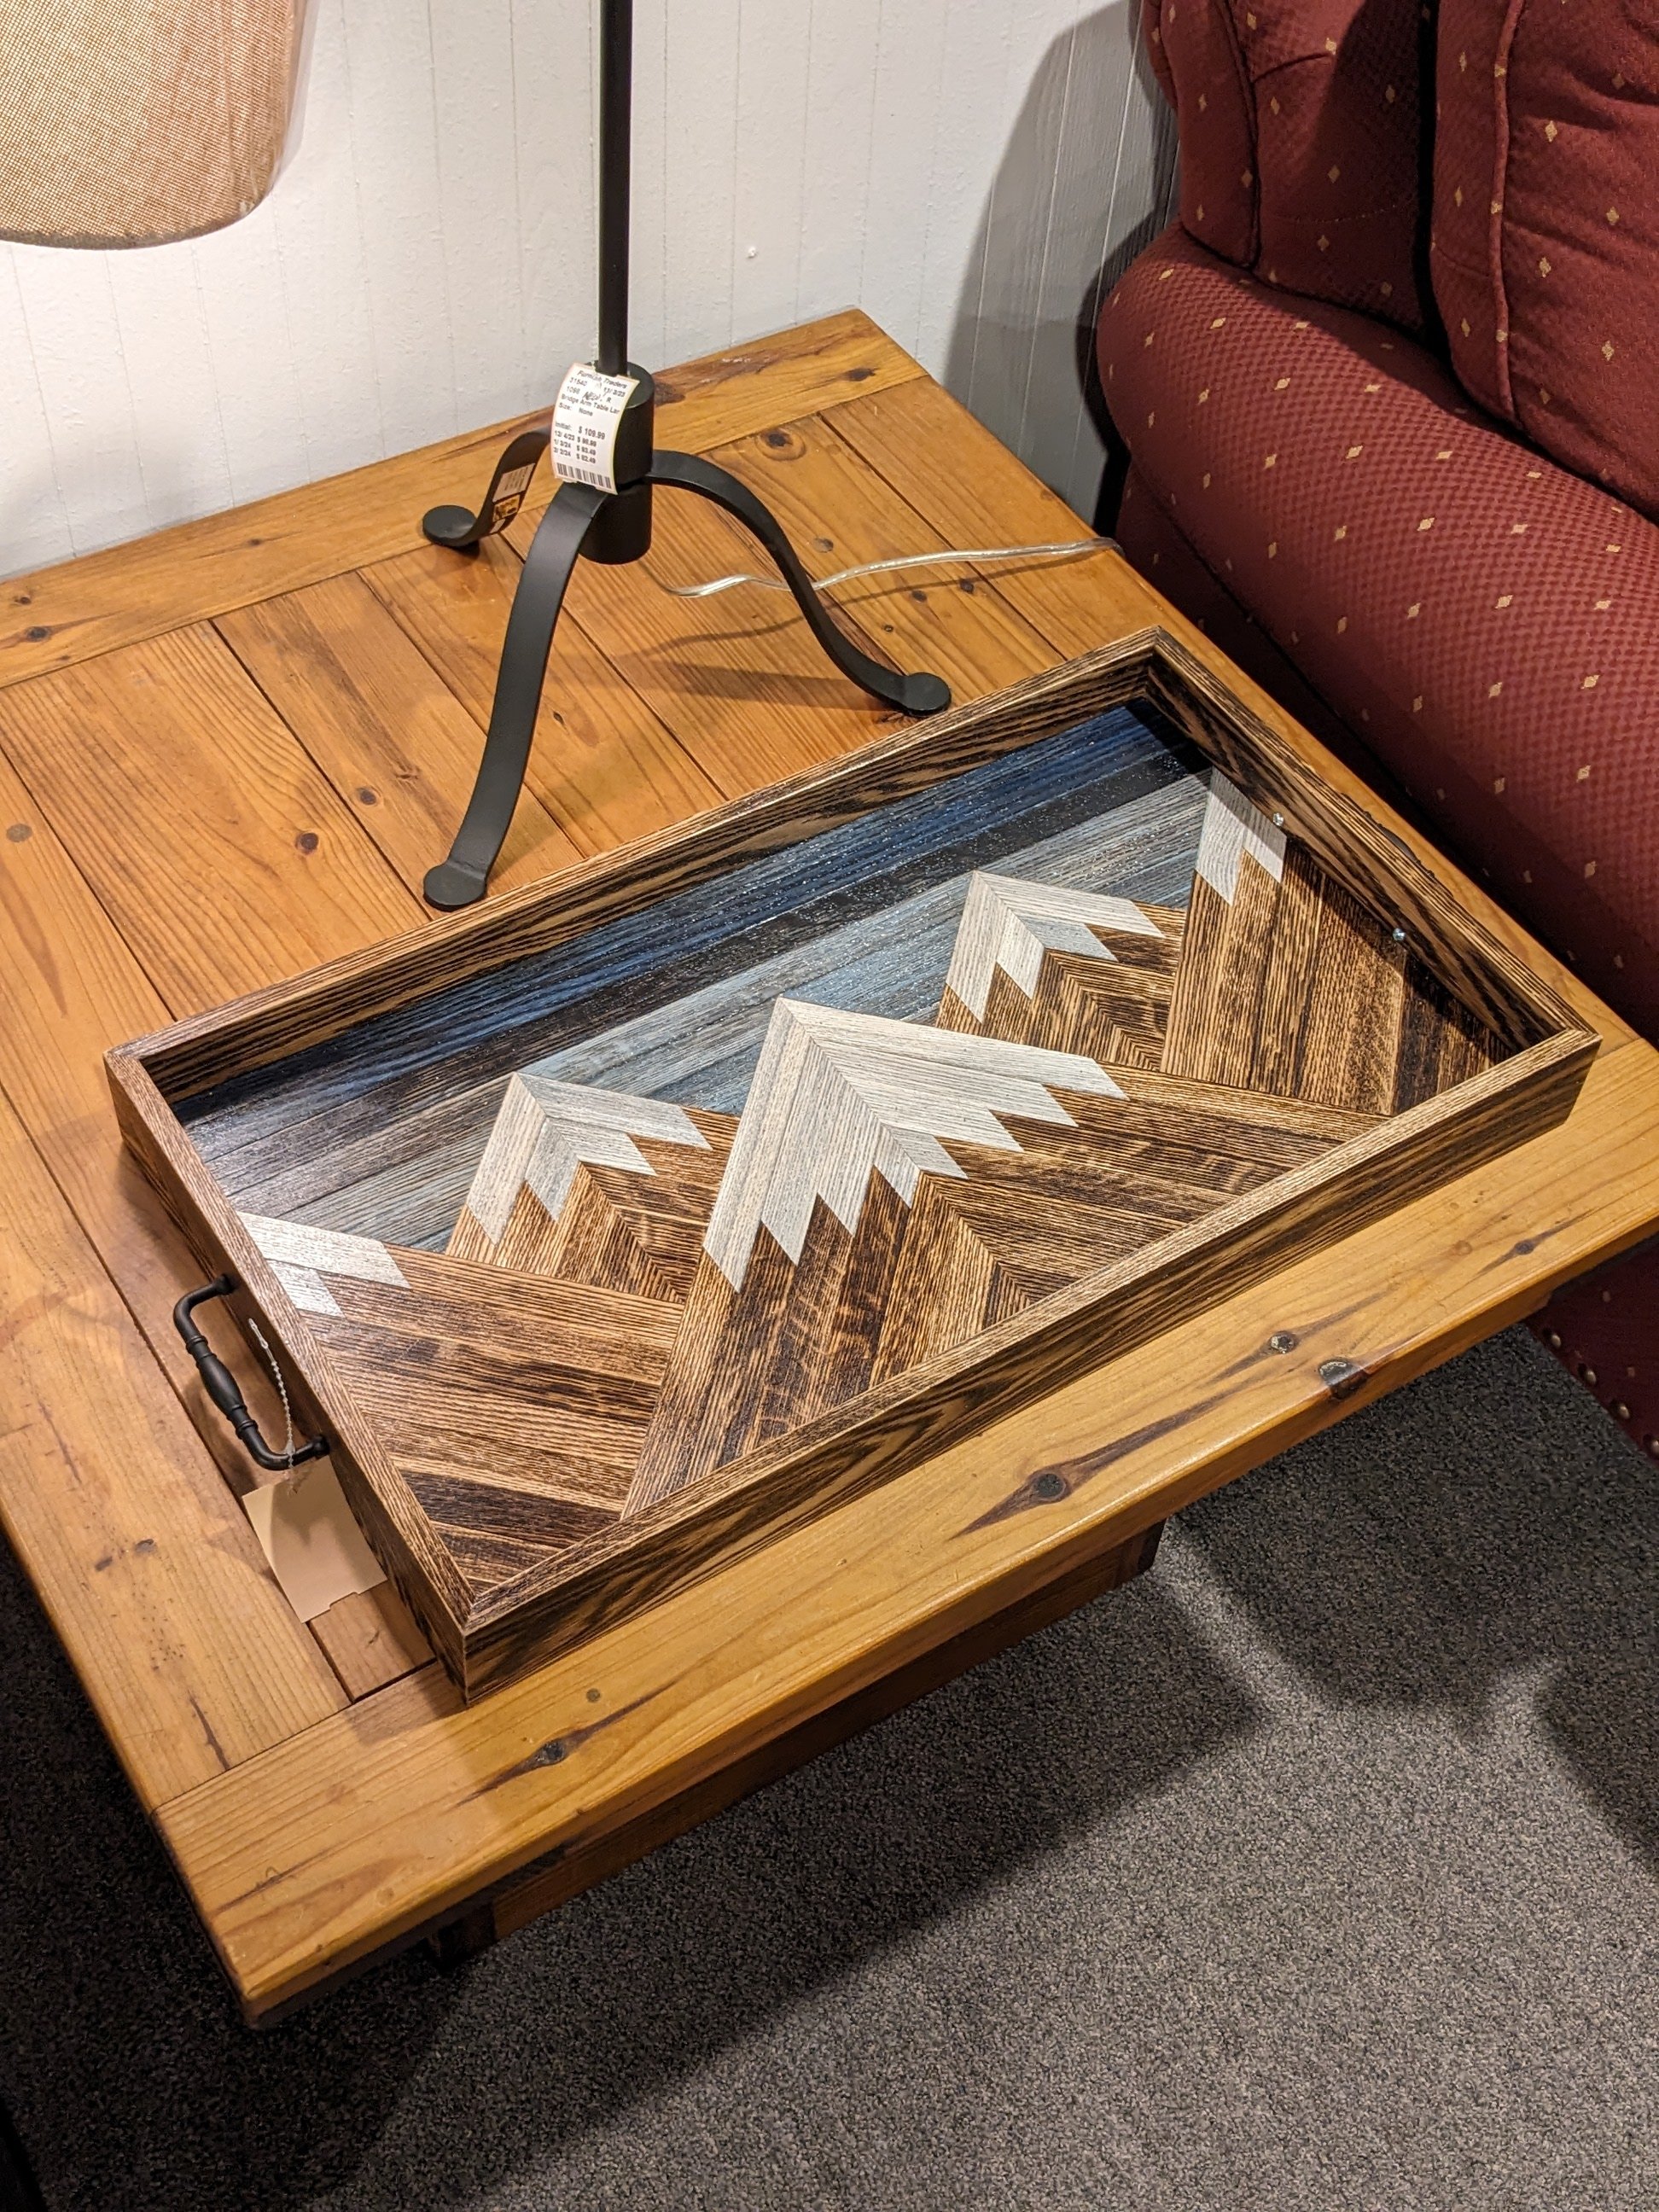 Handcrafted Mountains Ottoman Tray